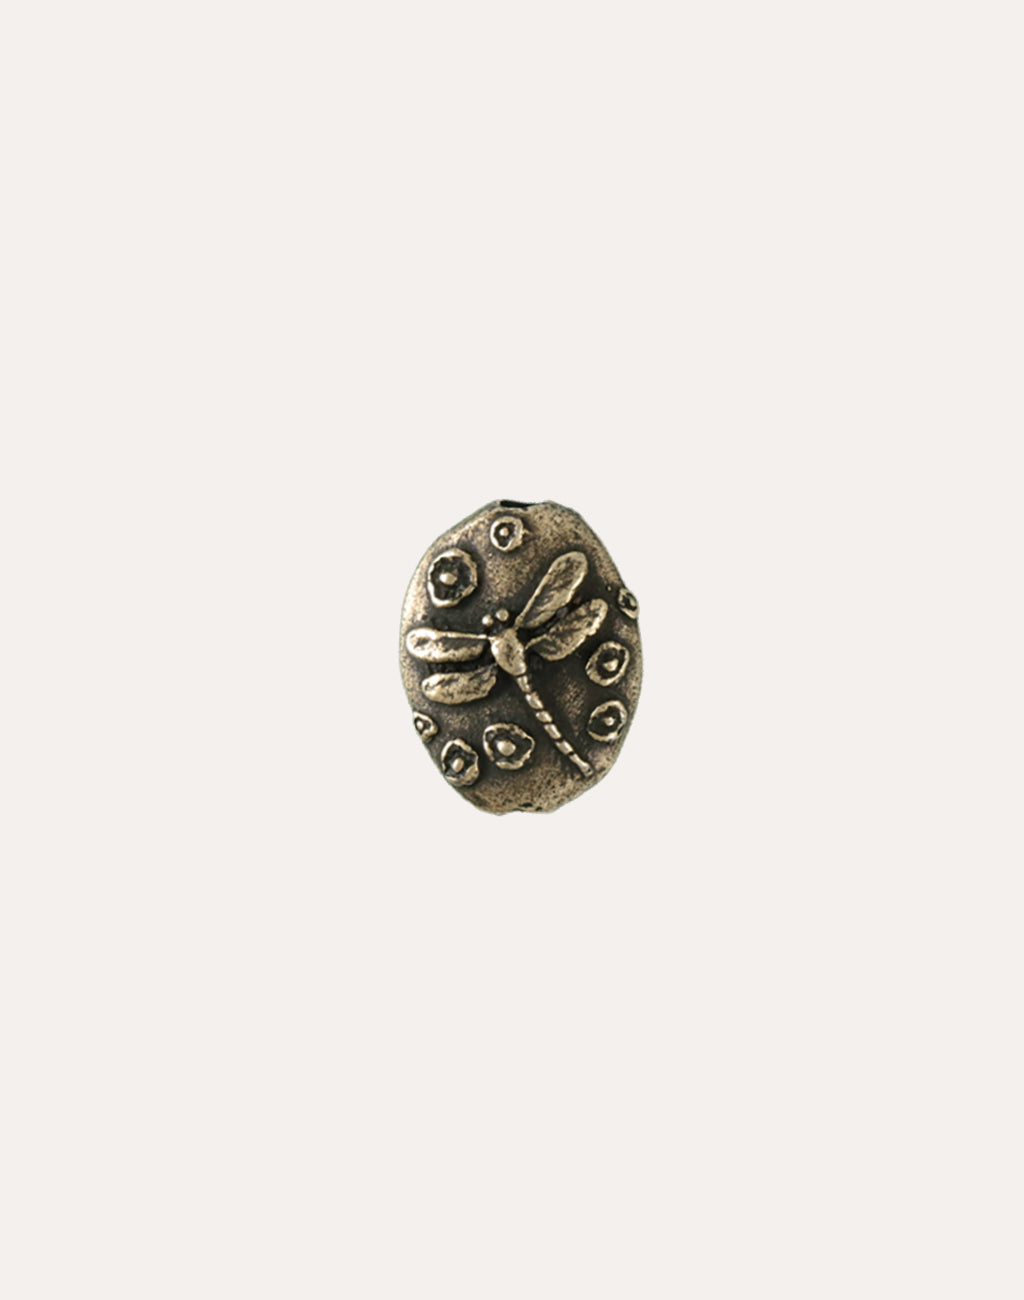 Dragonfly Pebble, 22x17mm, (1pc)